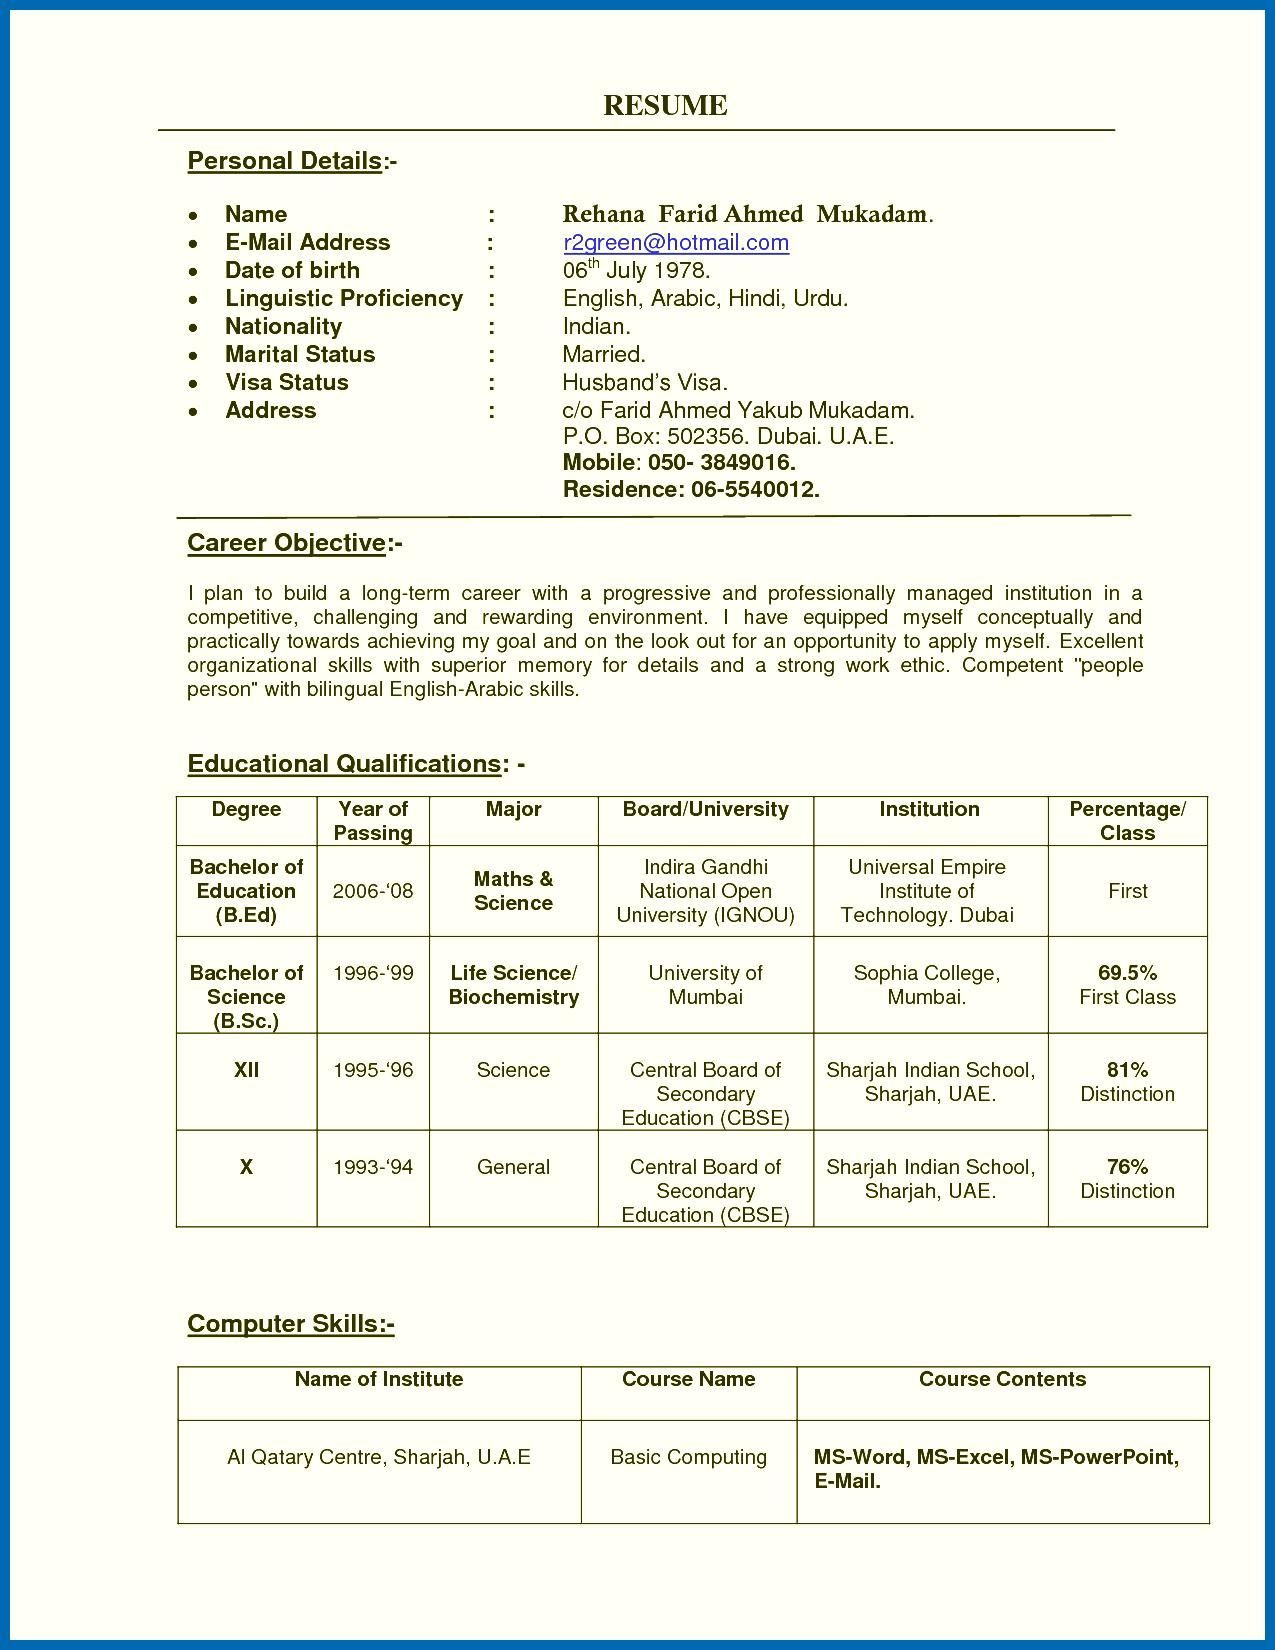 Sample Resume for English Teachers In India Resume Of A Teacher India Teachers Resume format India